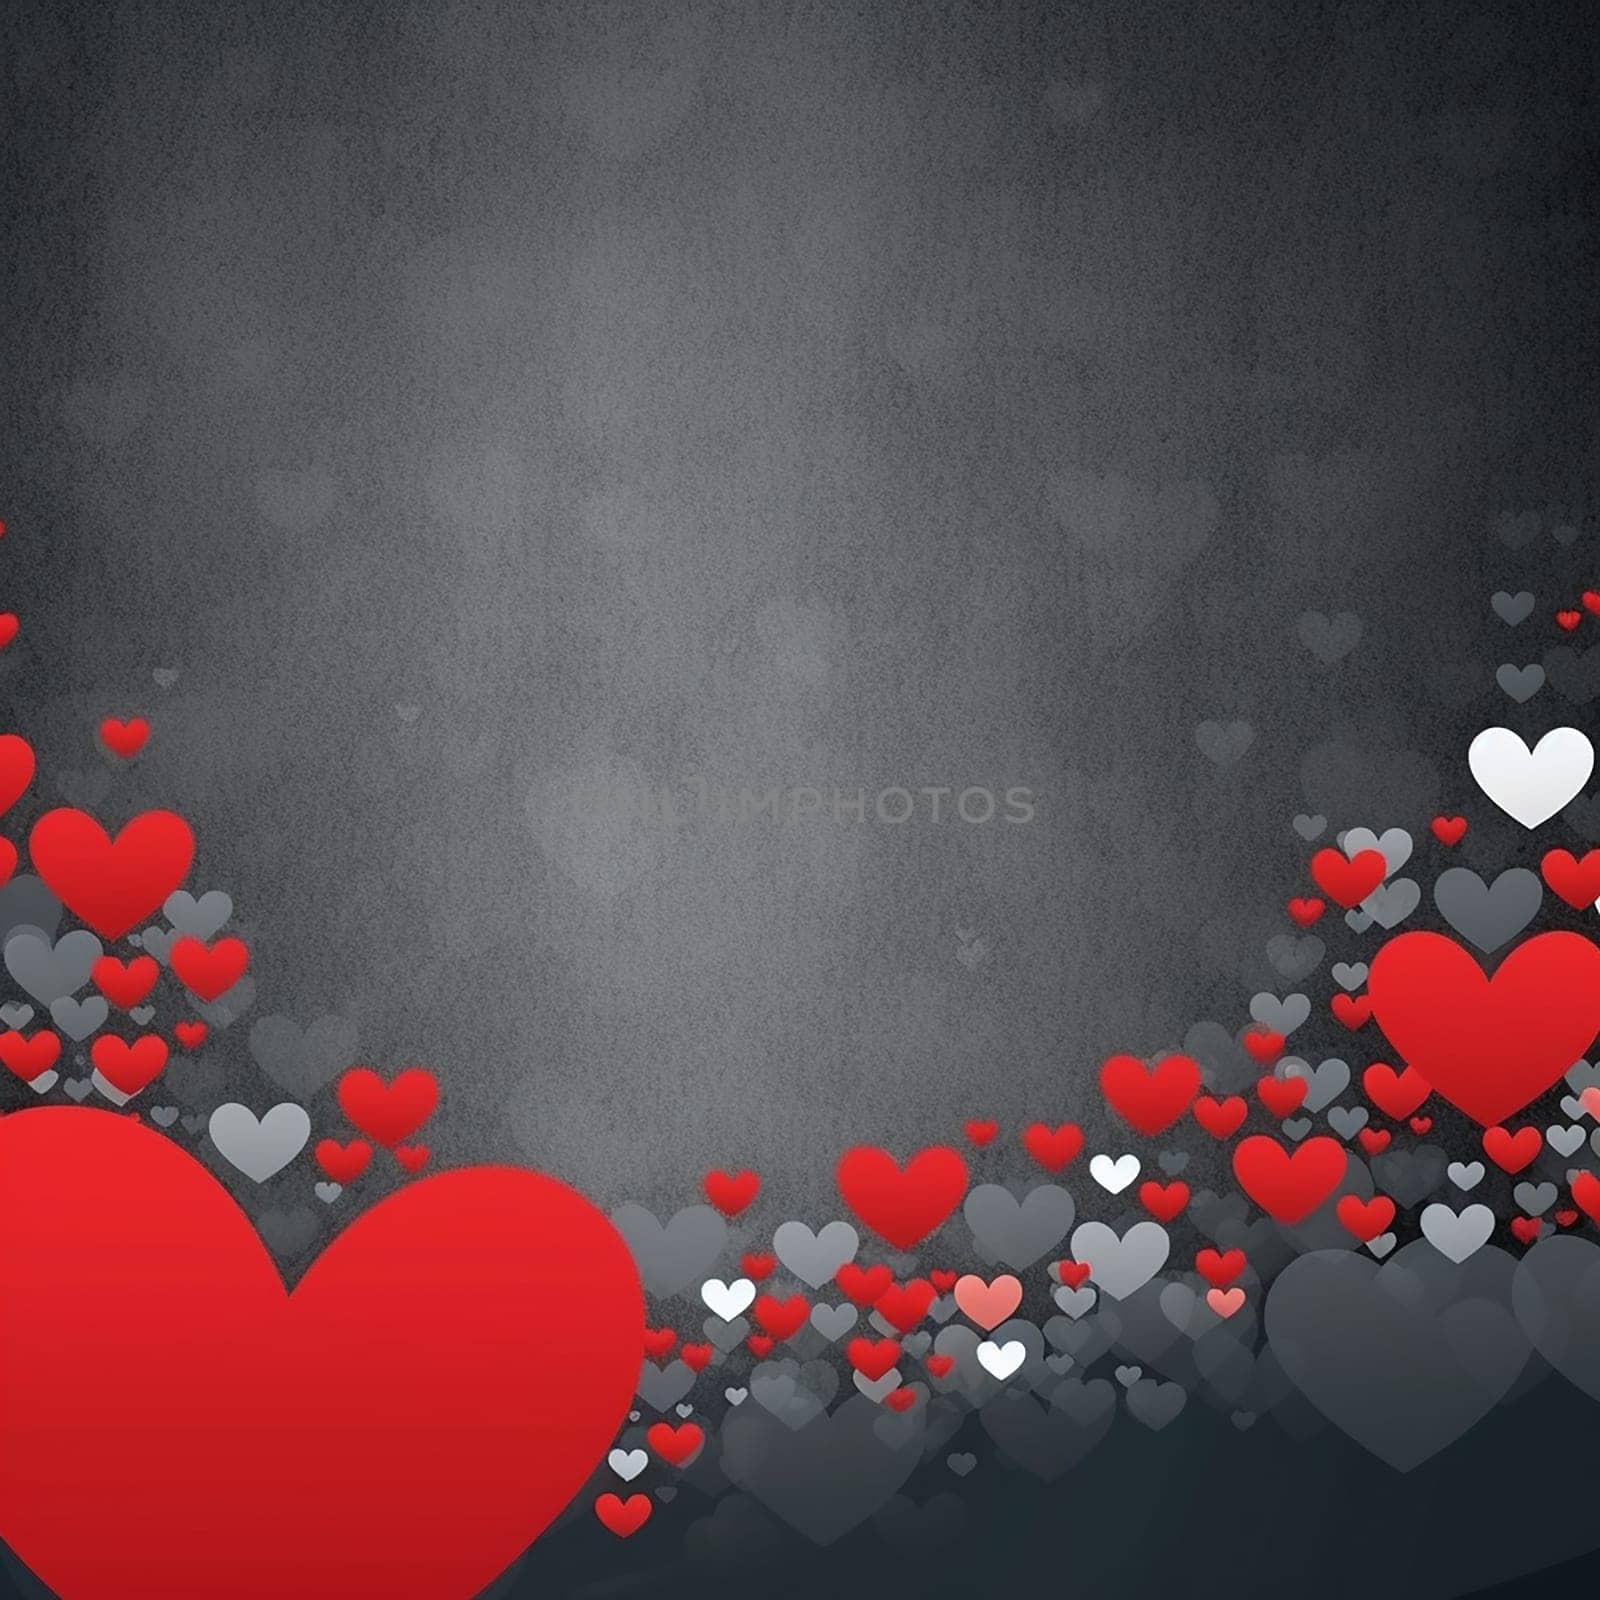 A multitude of red and white hearts scattered against a shaded backdrop.